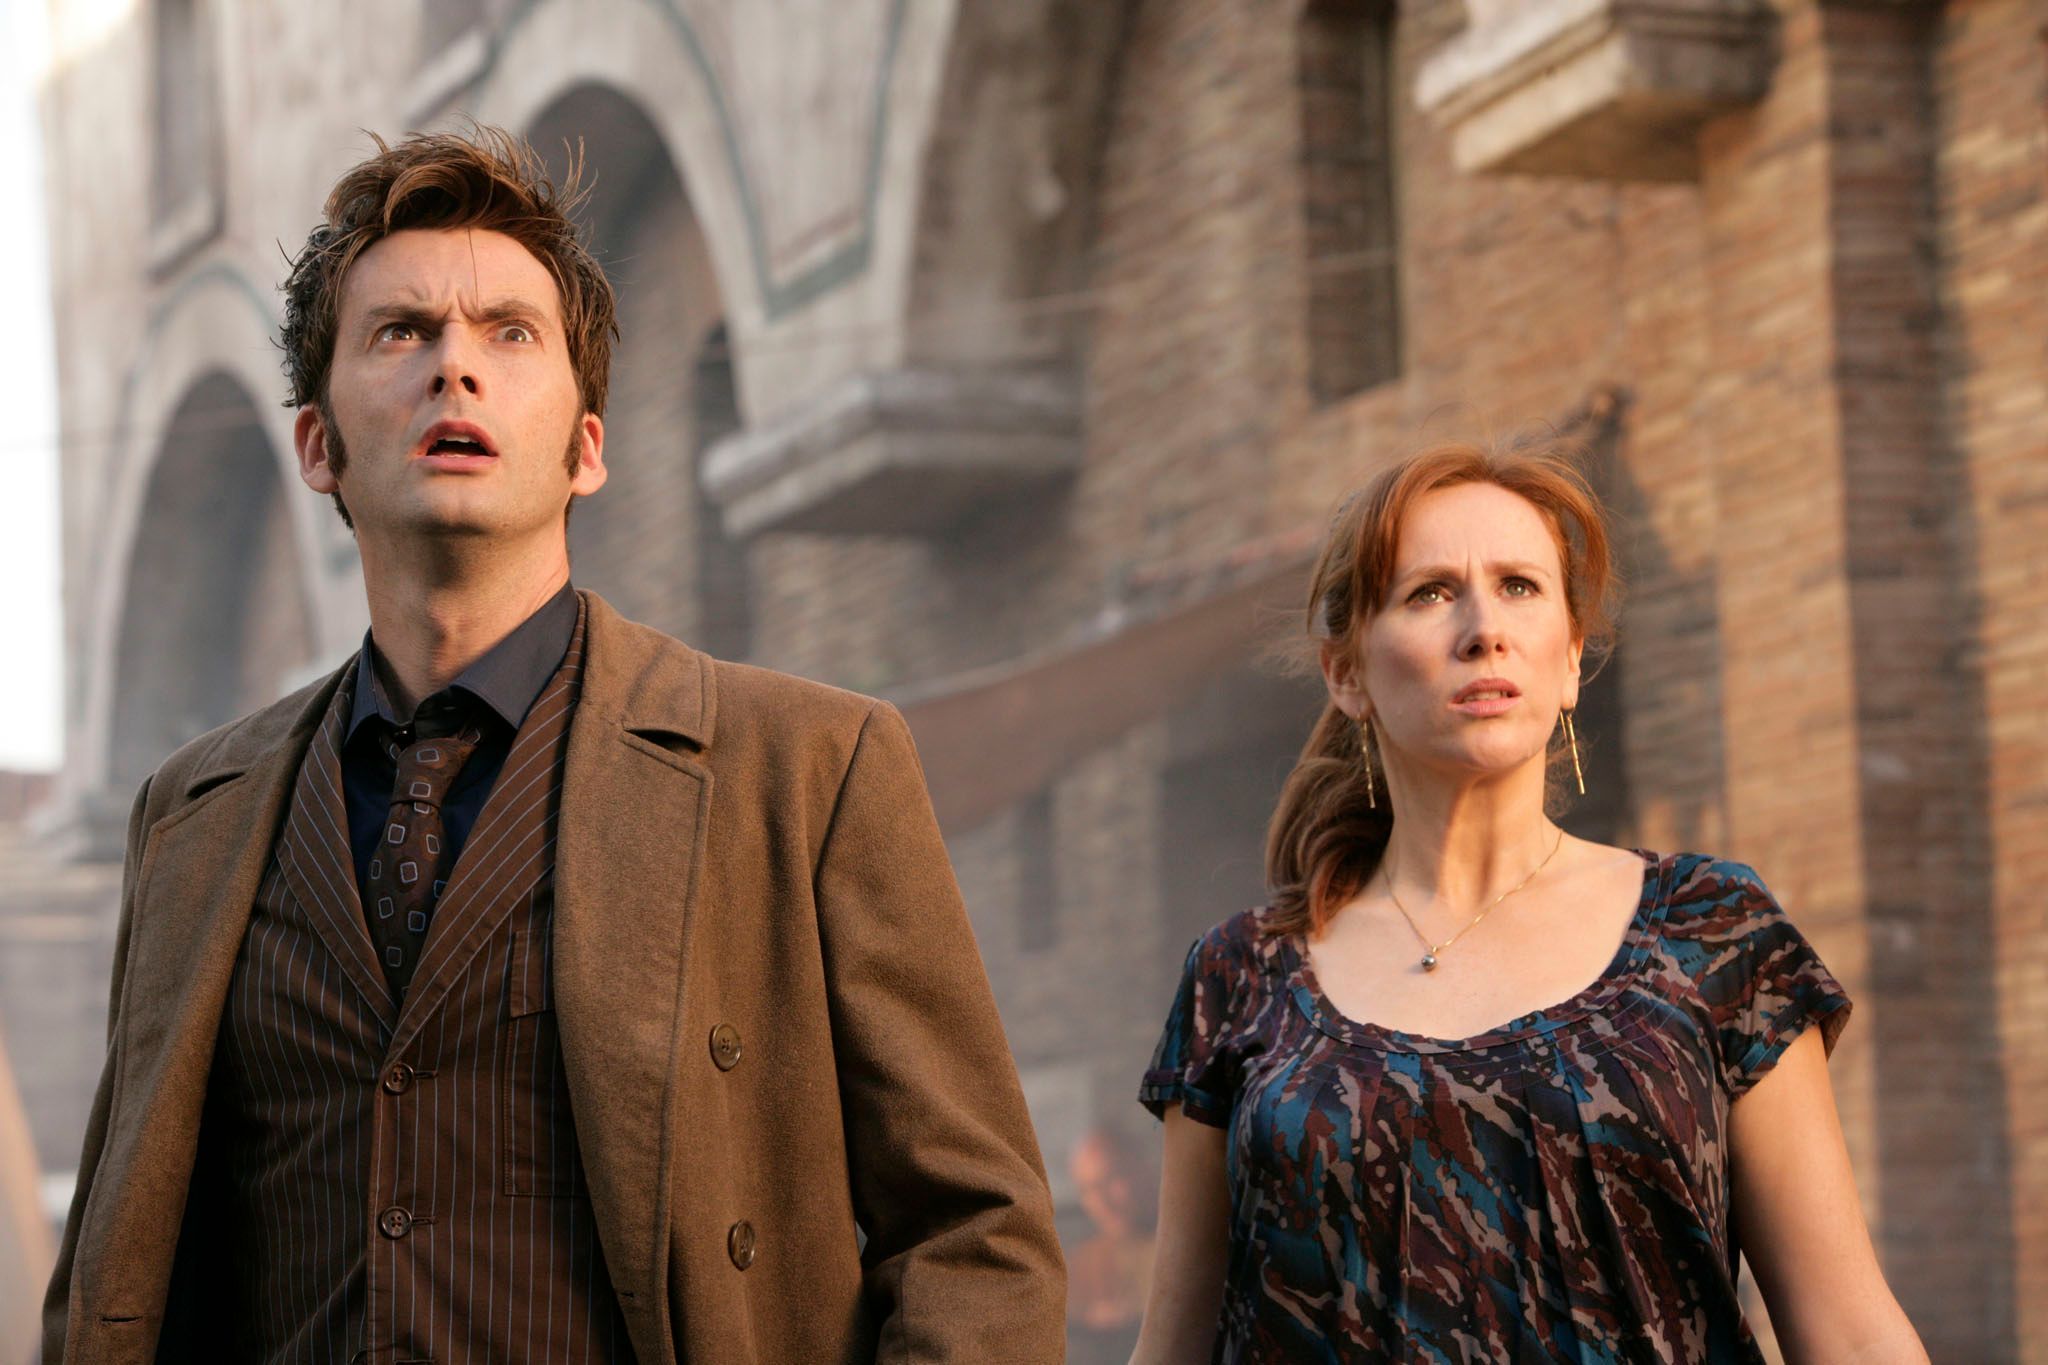 David Tennant (The Doctor) and Catherine Tate (Donna Noble) on the day Vesuvius erupts in The Fires of Pompeii (2008)